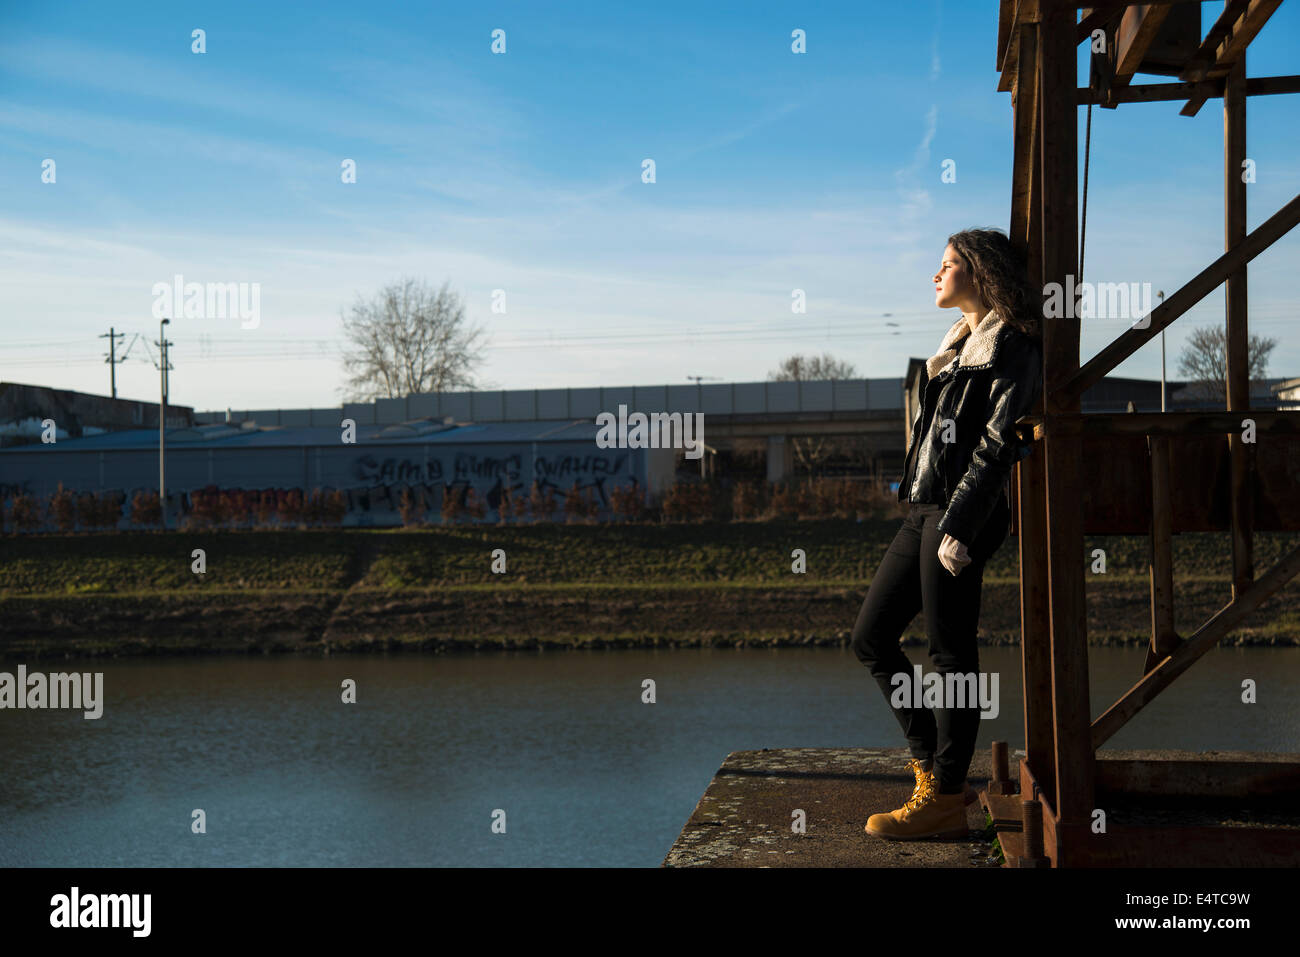 Teenage girl standing on commercial dock outdoors, looking into the distance, Germany Stock Photo